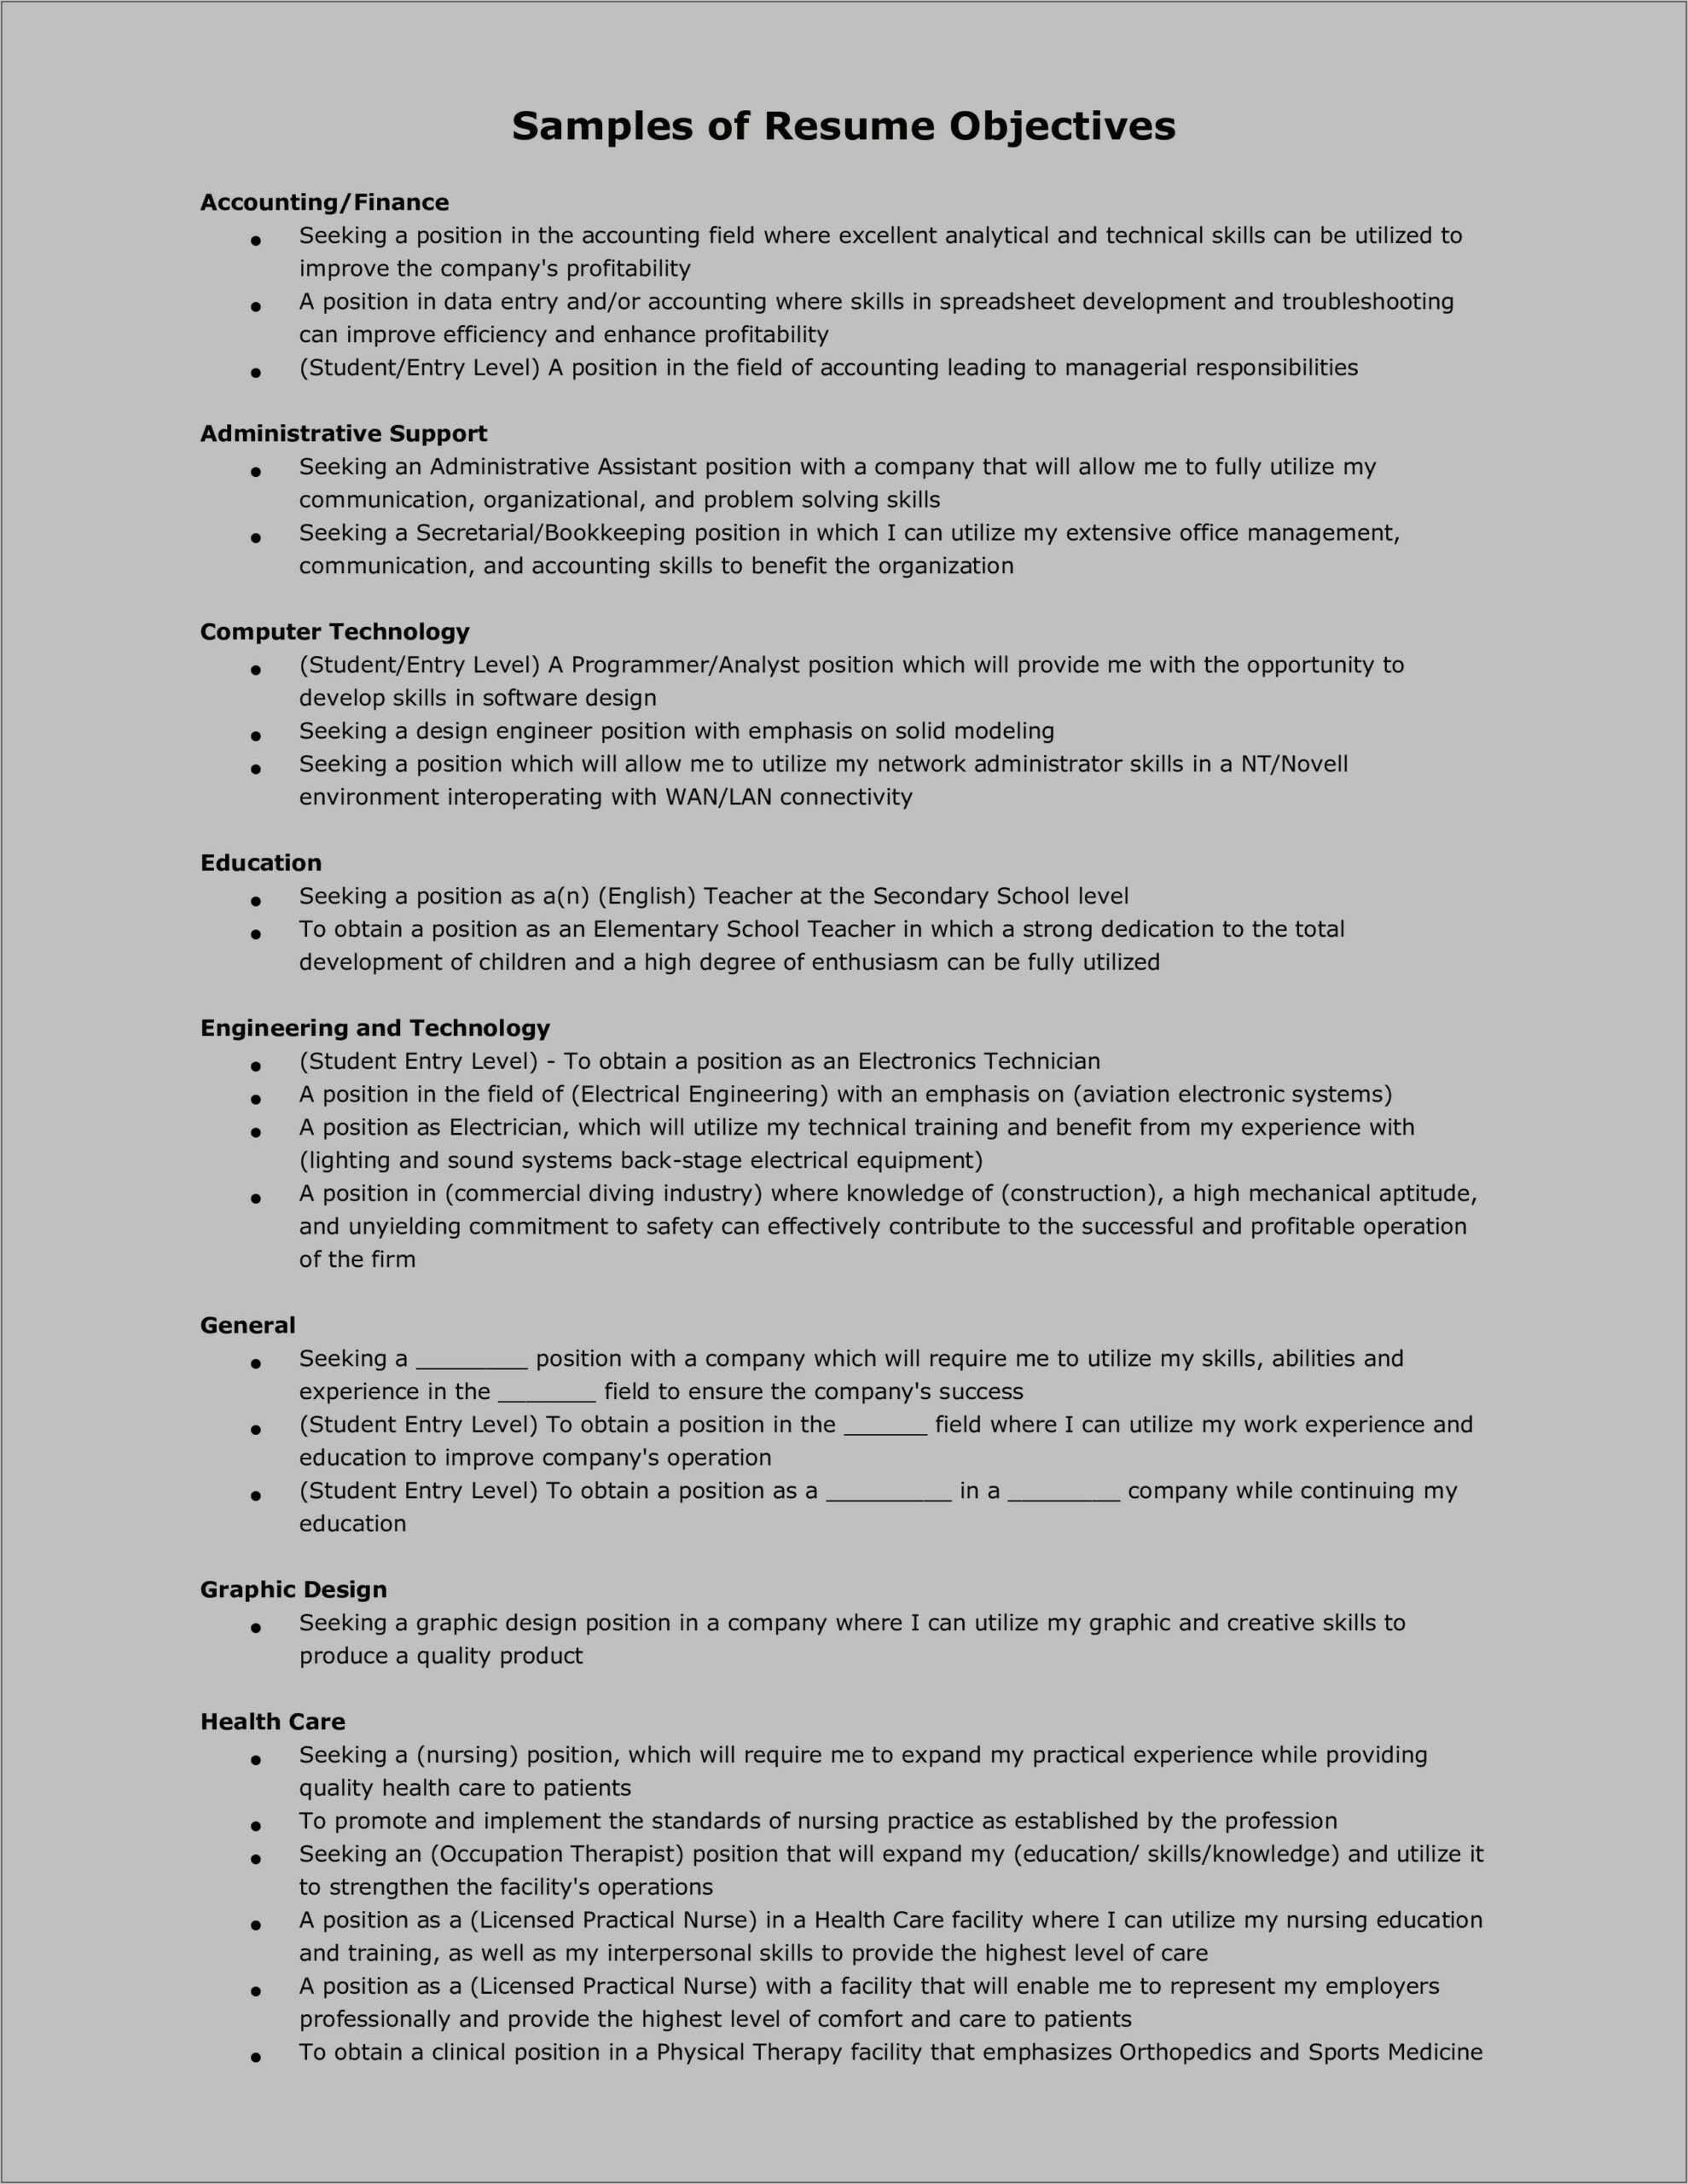 Resume Objective Samples For Administrative Assistant